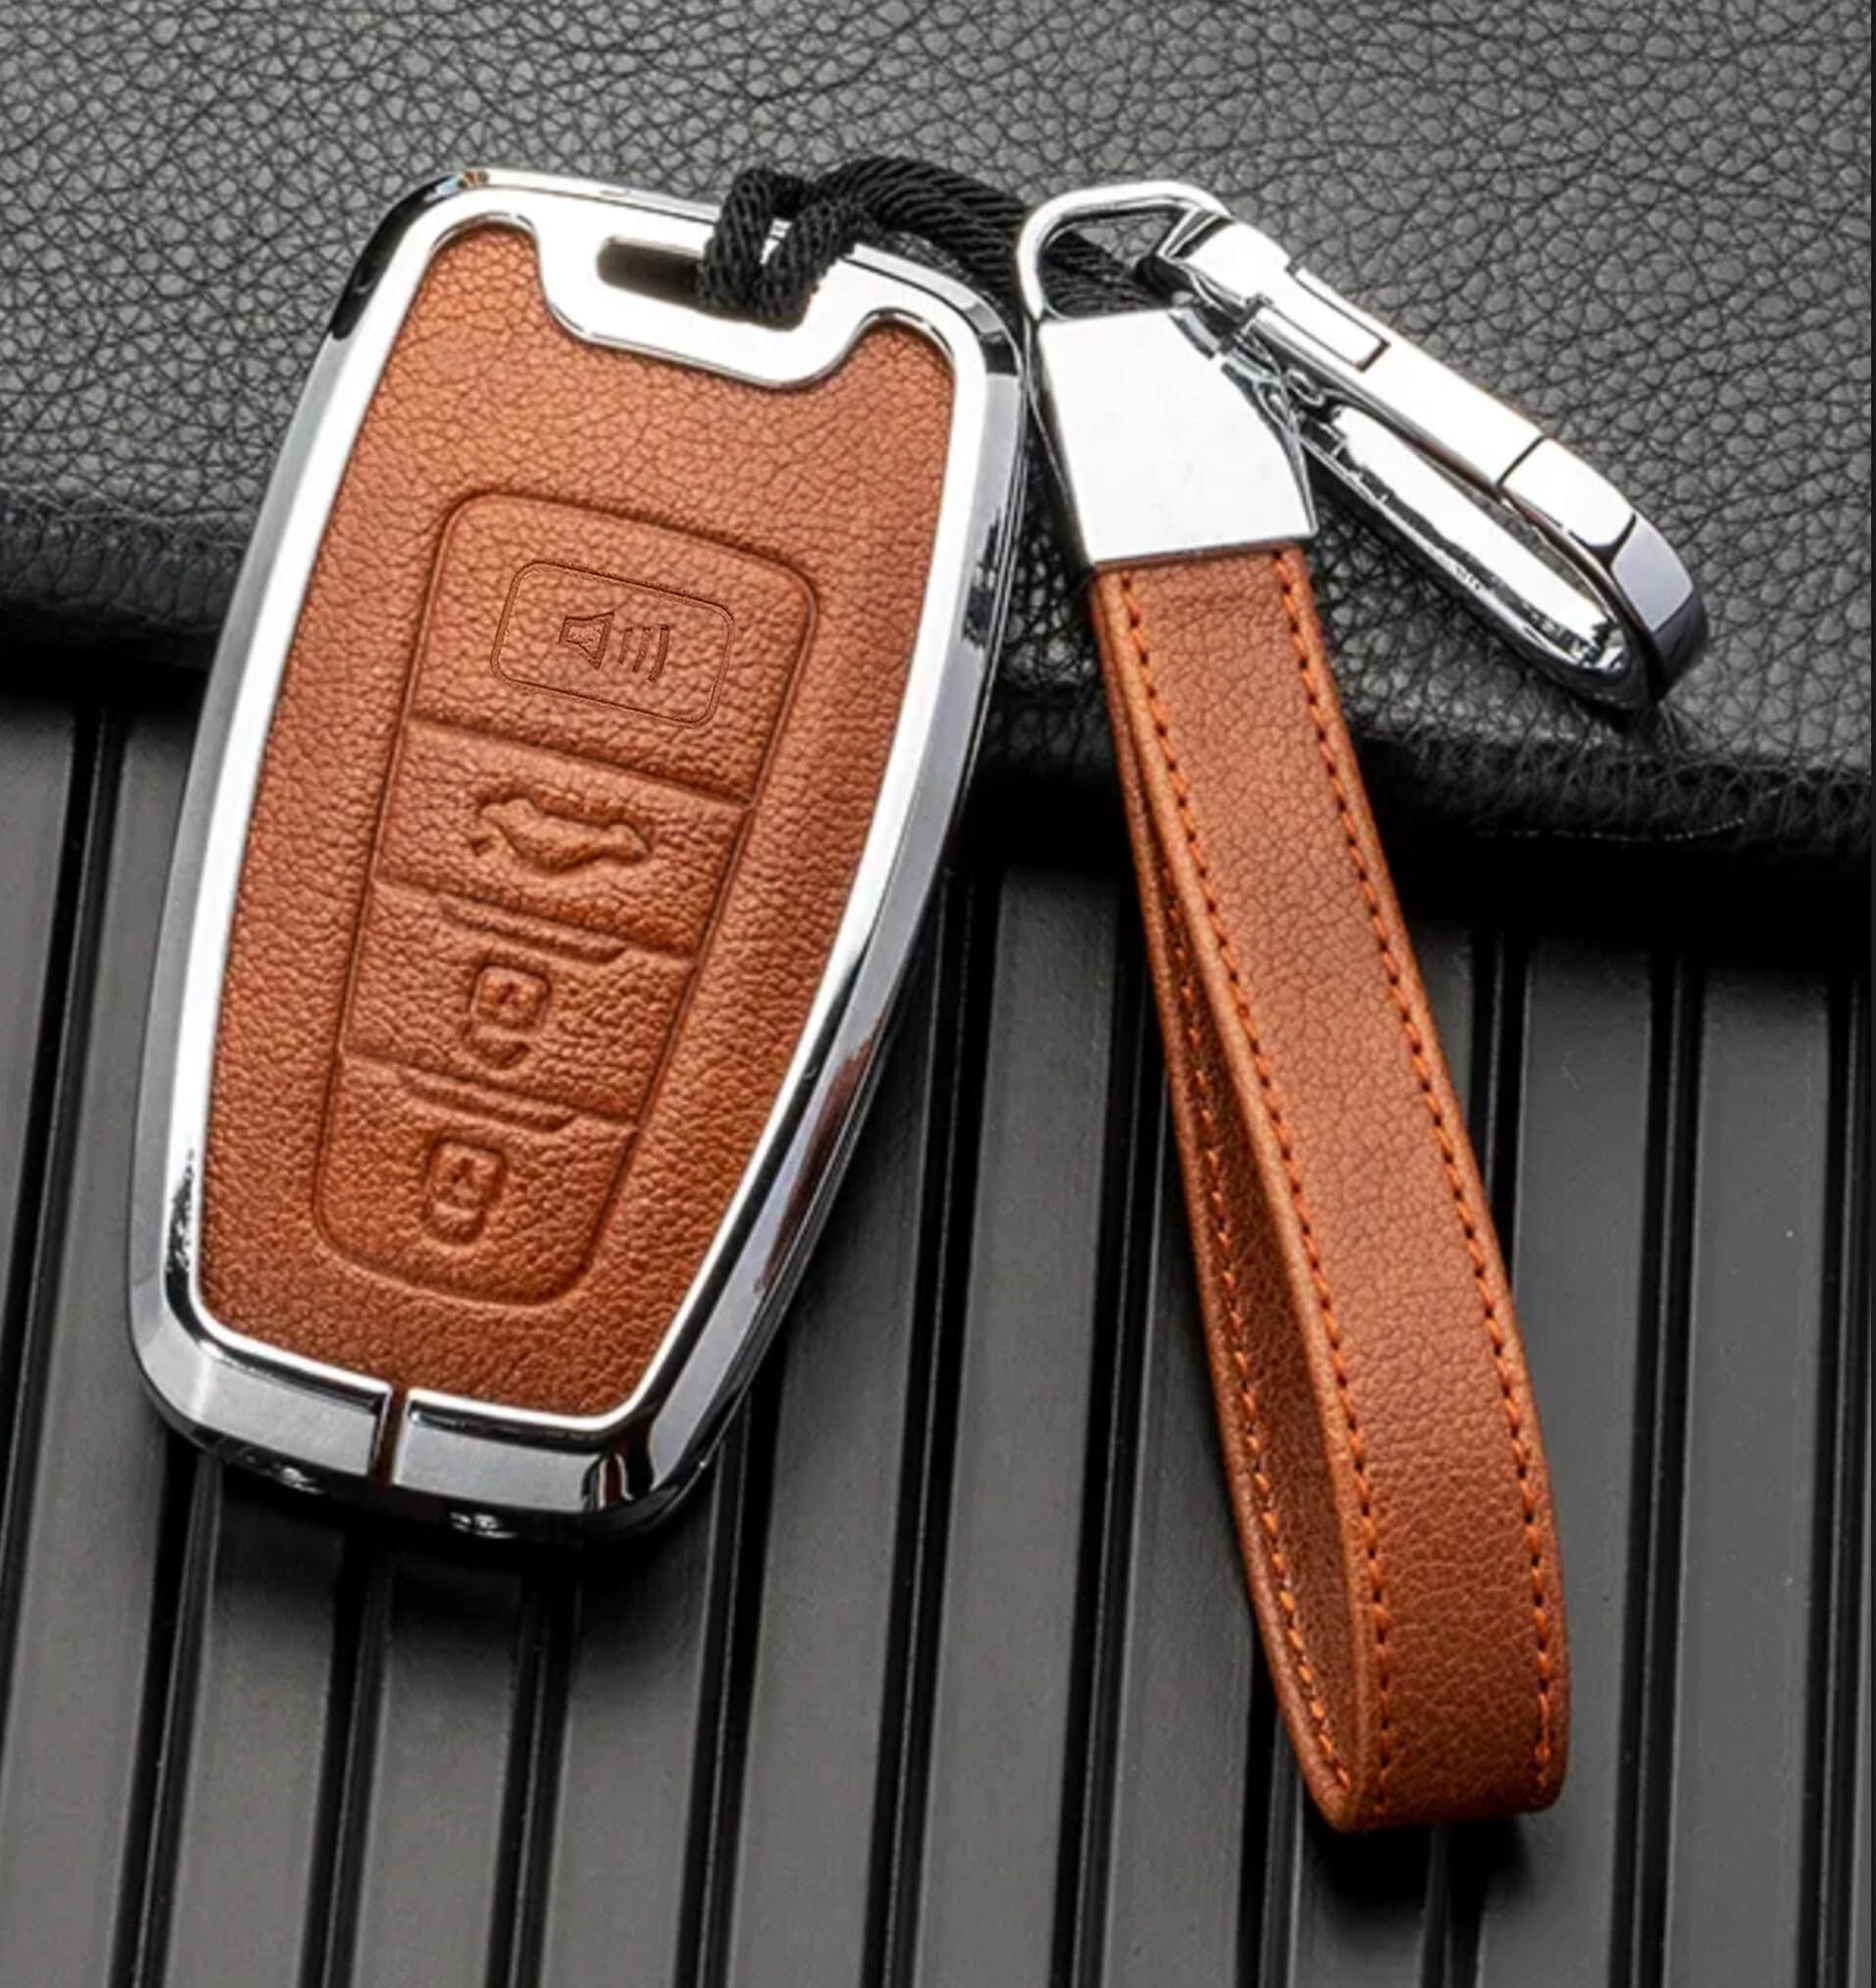  HIBEYO TPU Car Key Fob Cover for Toyota Hilux Fortuner Land  Cruiser Camry Coralla Crown RAV4 Smart 2 Button Key Case Keychians  Accessories for Women-Gray : Automotive